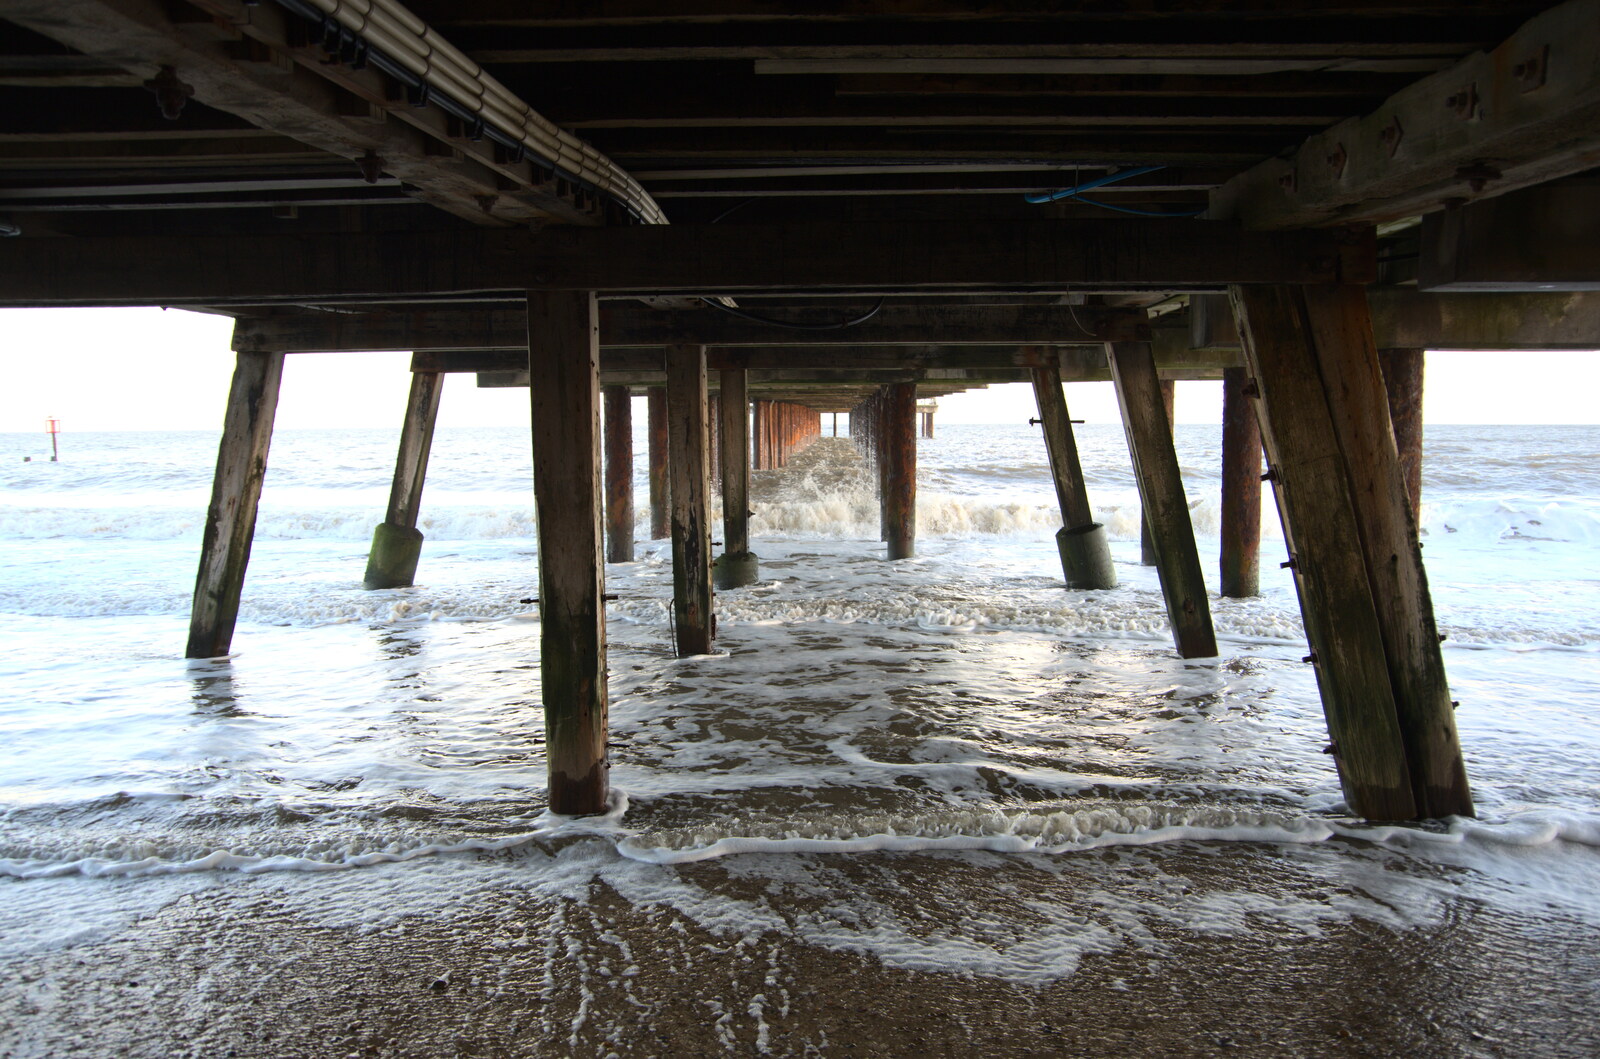 Under the pier from A Return to the Beach, Southwold, Suffolk - 20th December 2020